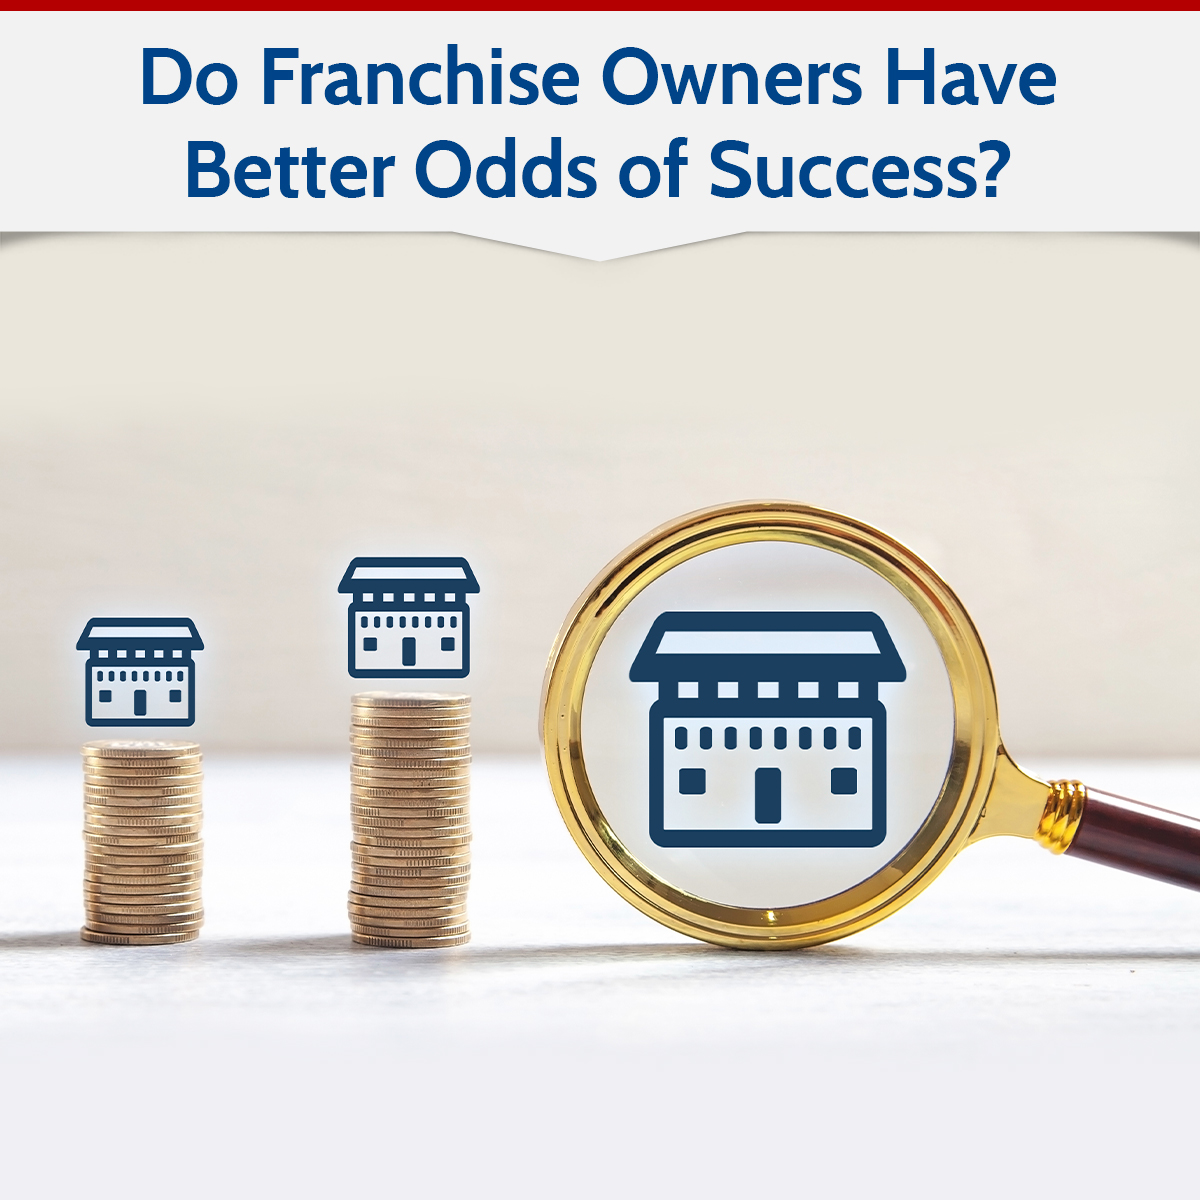 Do Franchise Owners Have Better Odds of Success?